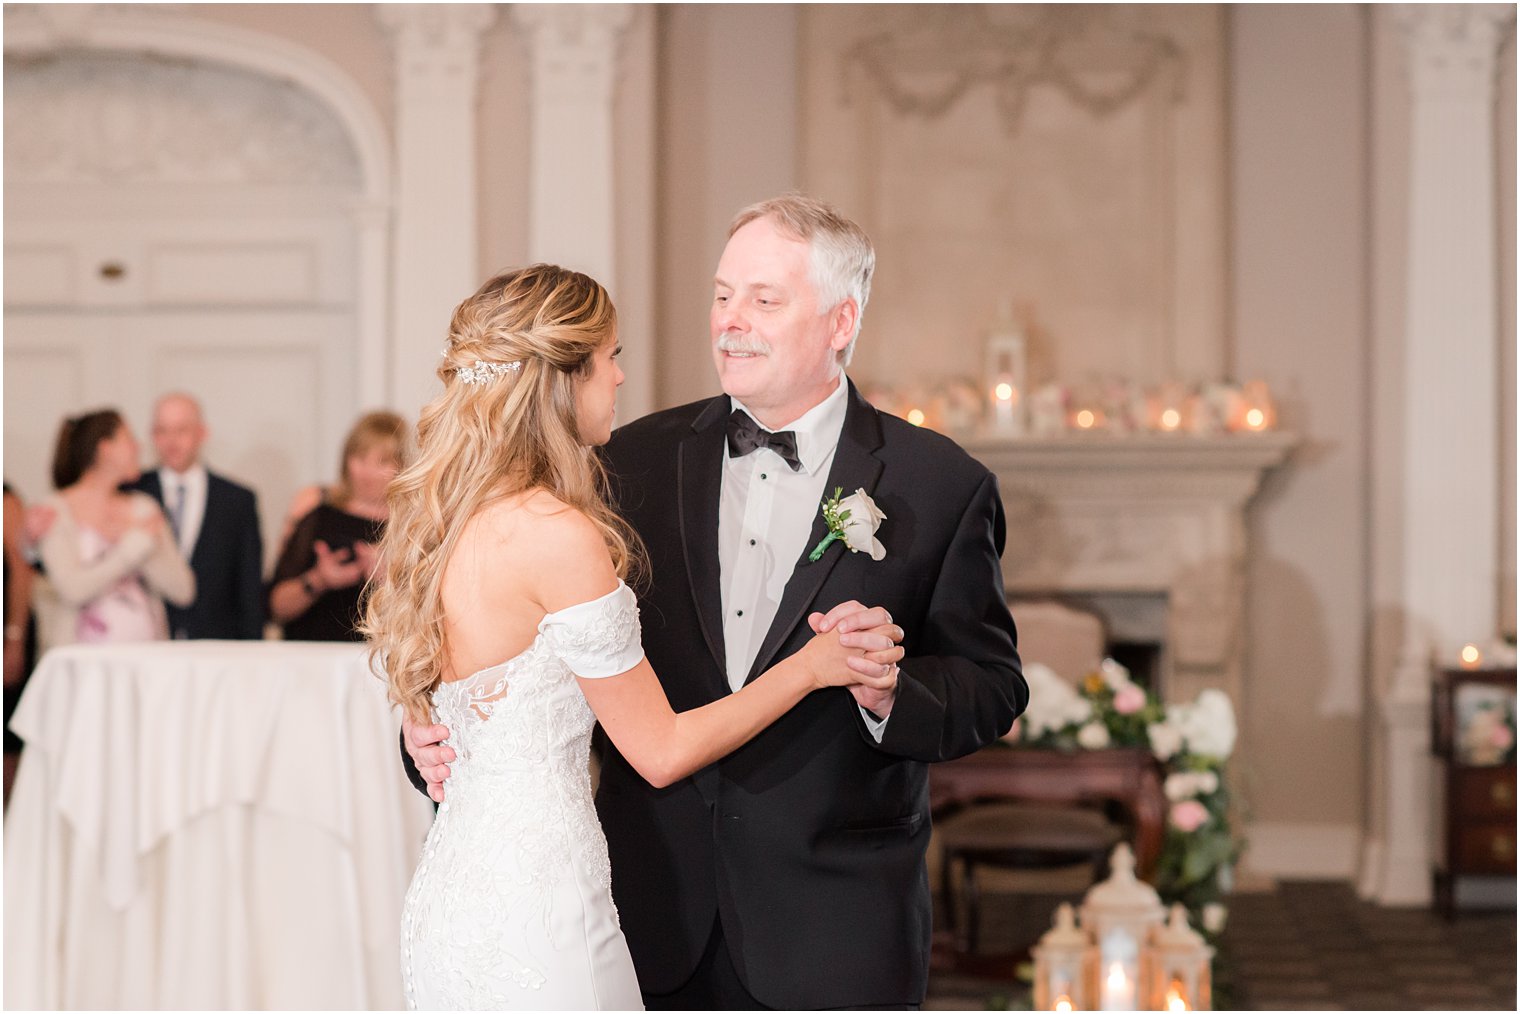 bride and father dance during NJ wedding reception in ballroom